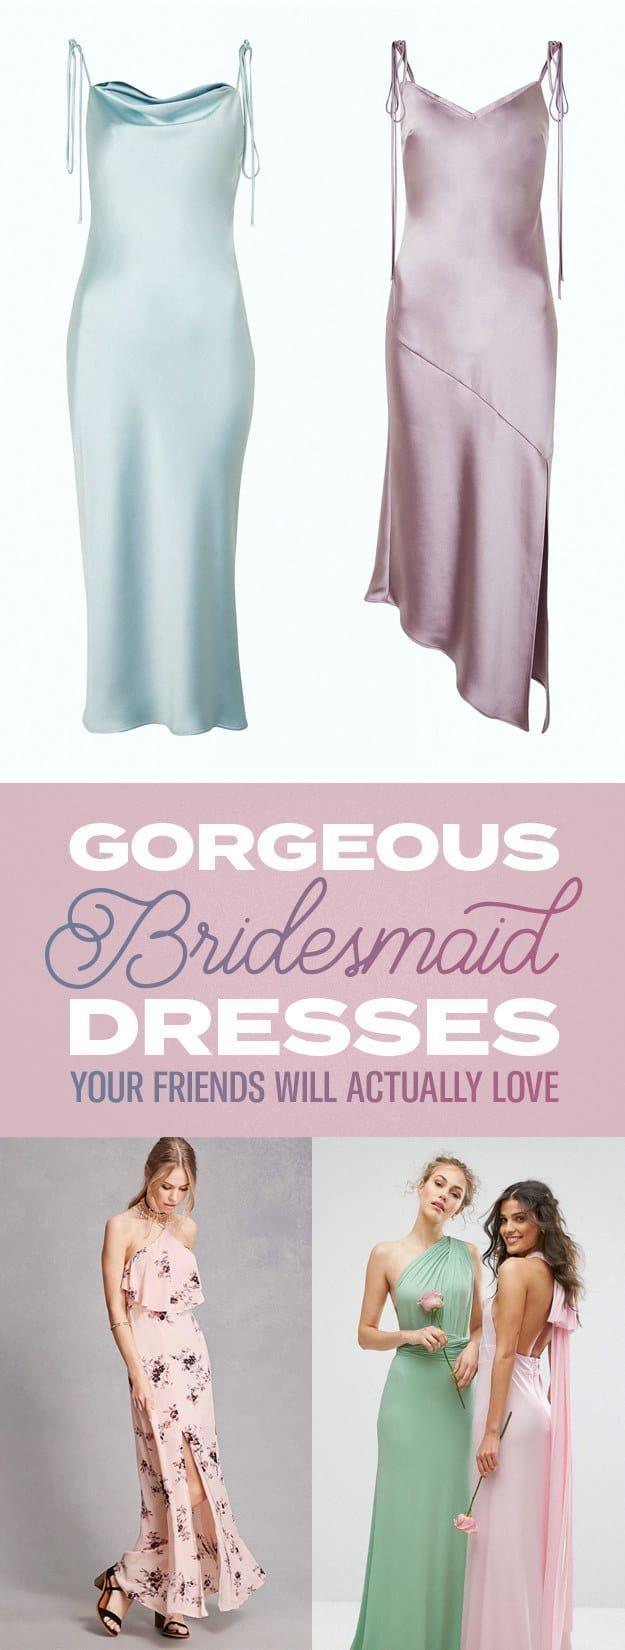 Wedding - 33 Gorgeous Bridesmaid Dresses Your Friends Will Actually Love